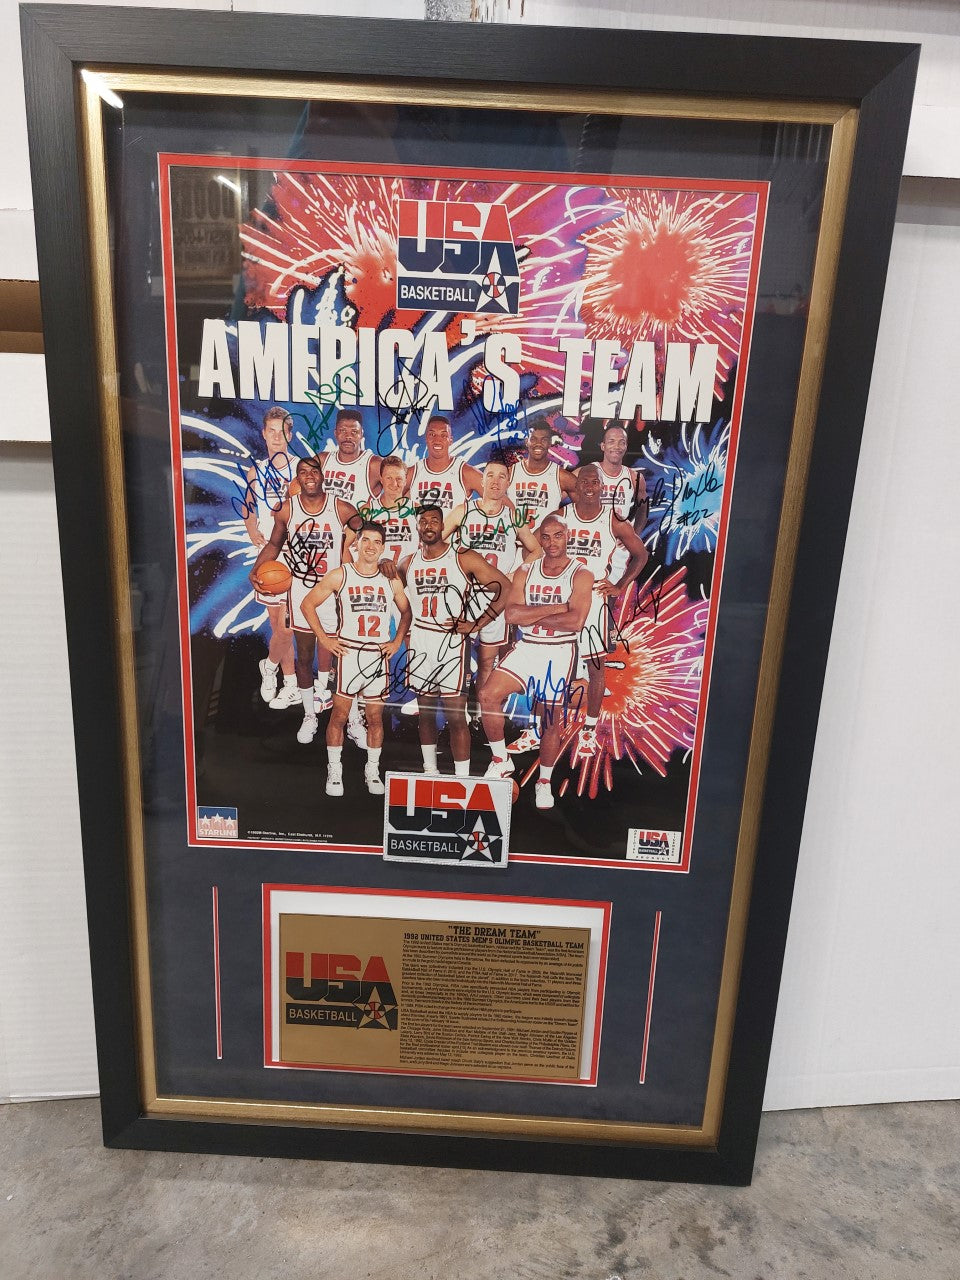 1992 Team USA "The Dream Team" Magic Johnson, Michael Jordan, Larry Bird all 12 poster signed and framed 24x36 with proof